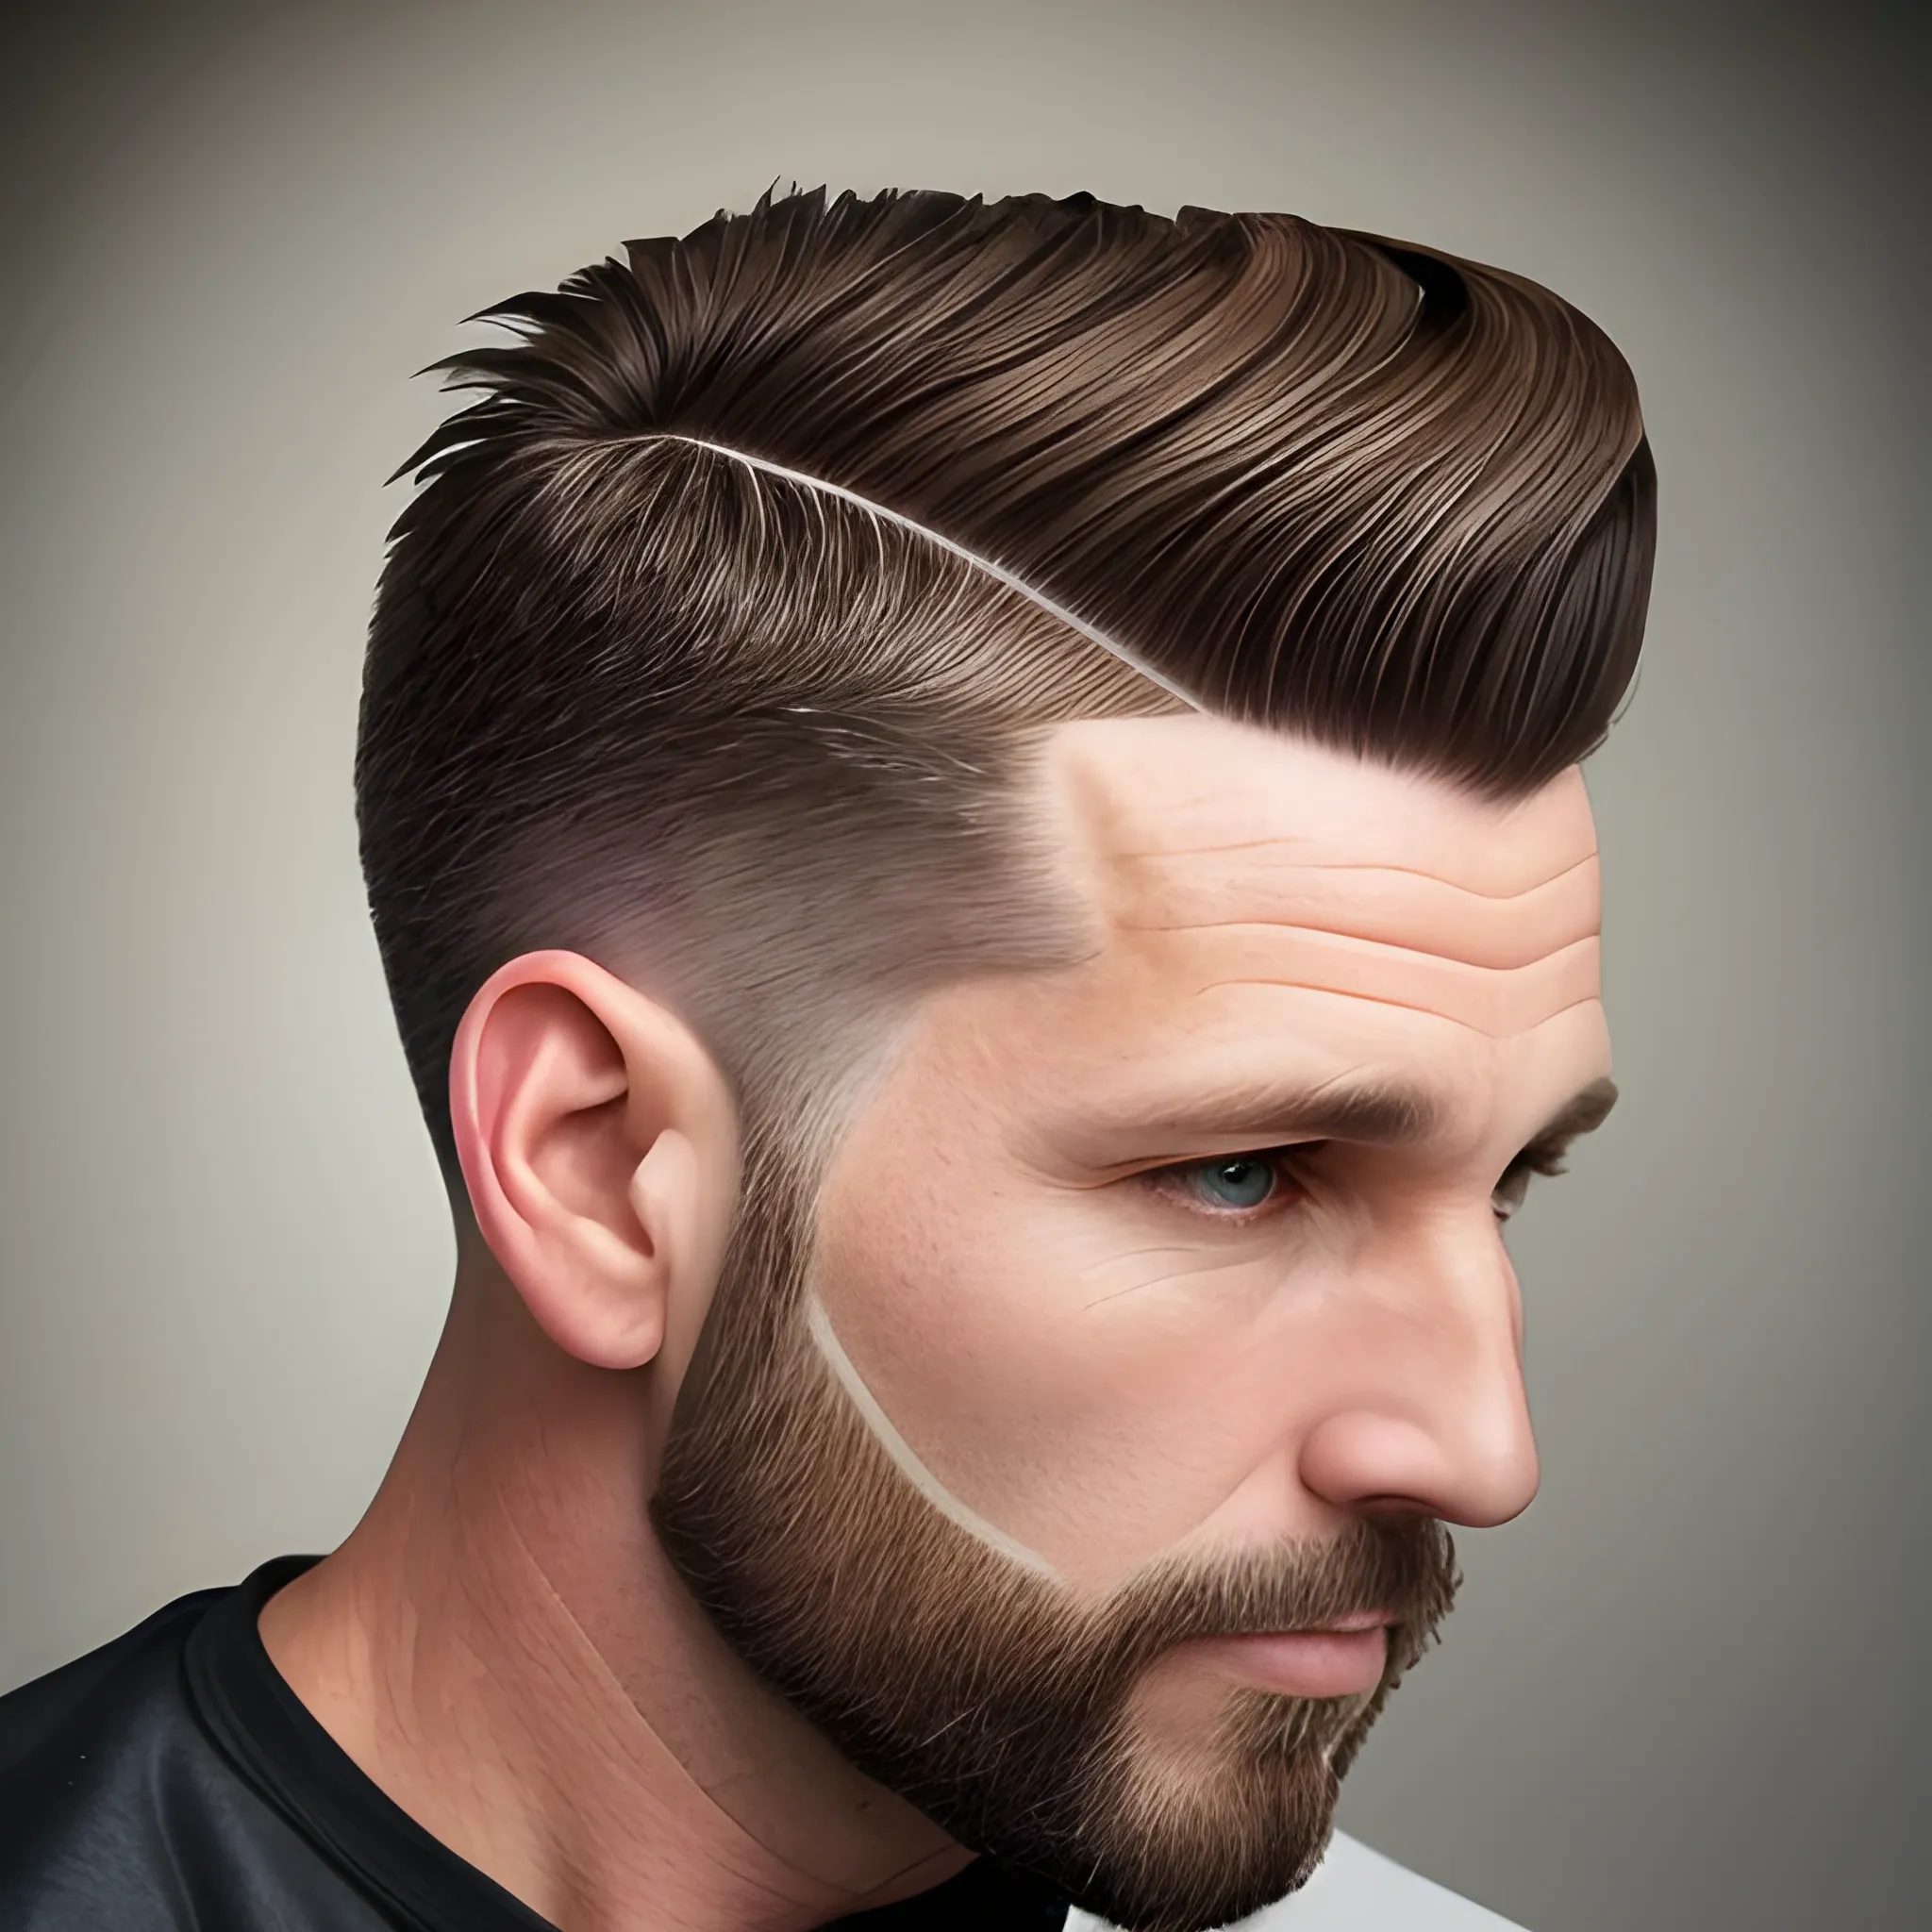 Portrait of 40 year old Caucasian male with very short brown hair coming to a peak in front with high fade for haircut with egg shaped skull. 